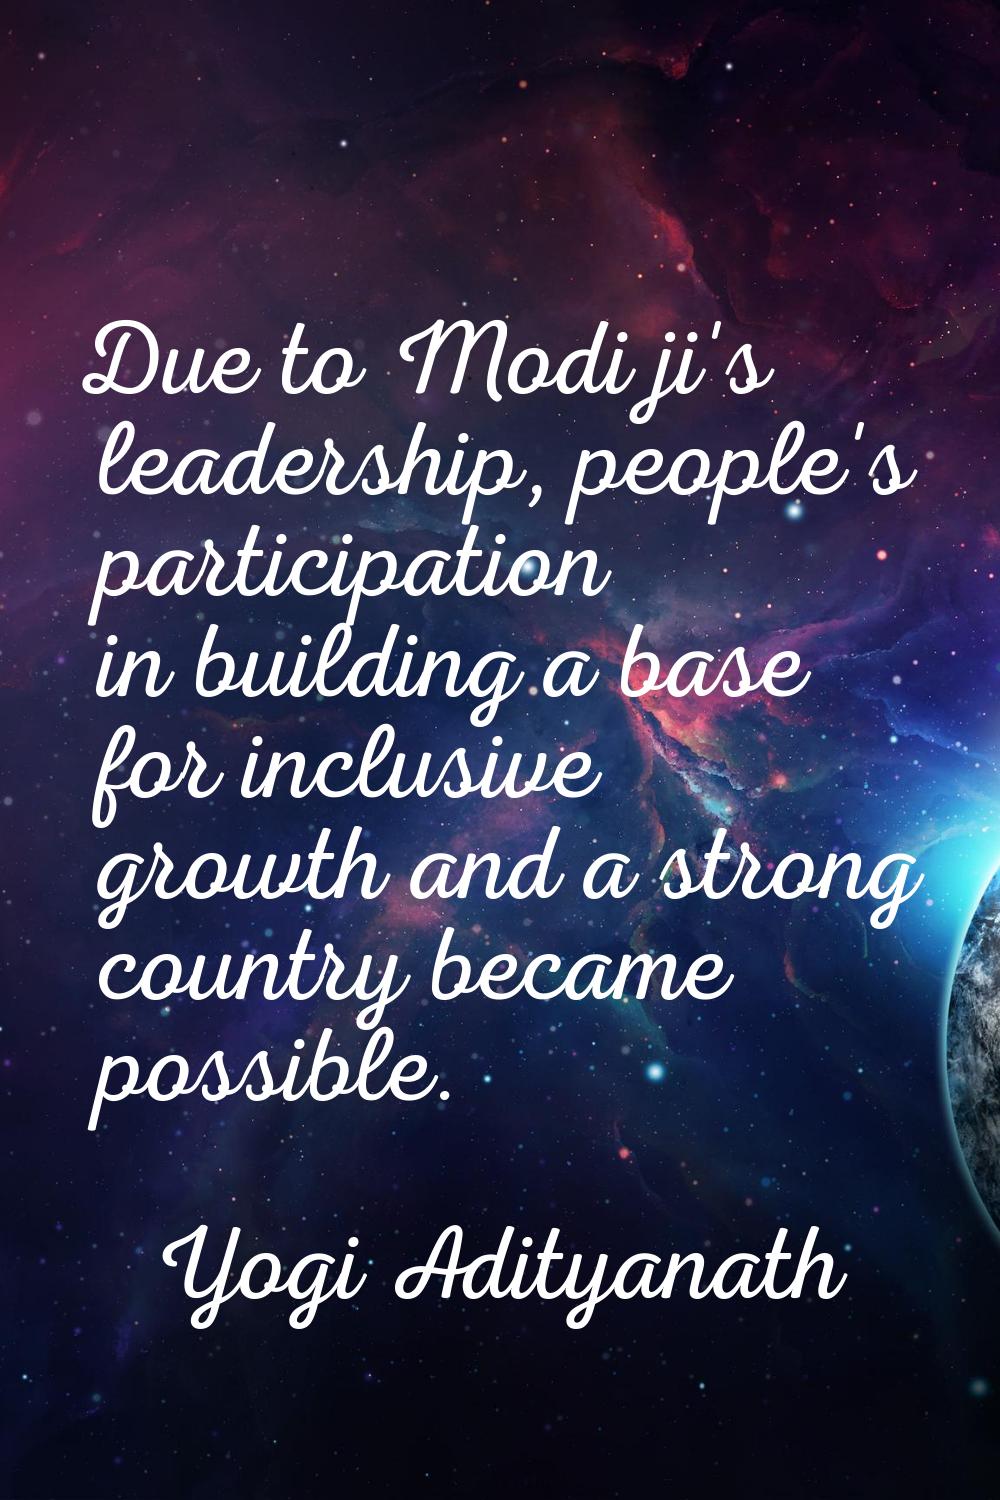 Due to Modi ji's leadership, people's participation in building a base for inclusive growth and a s